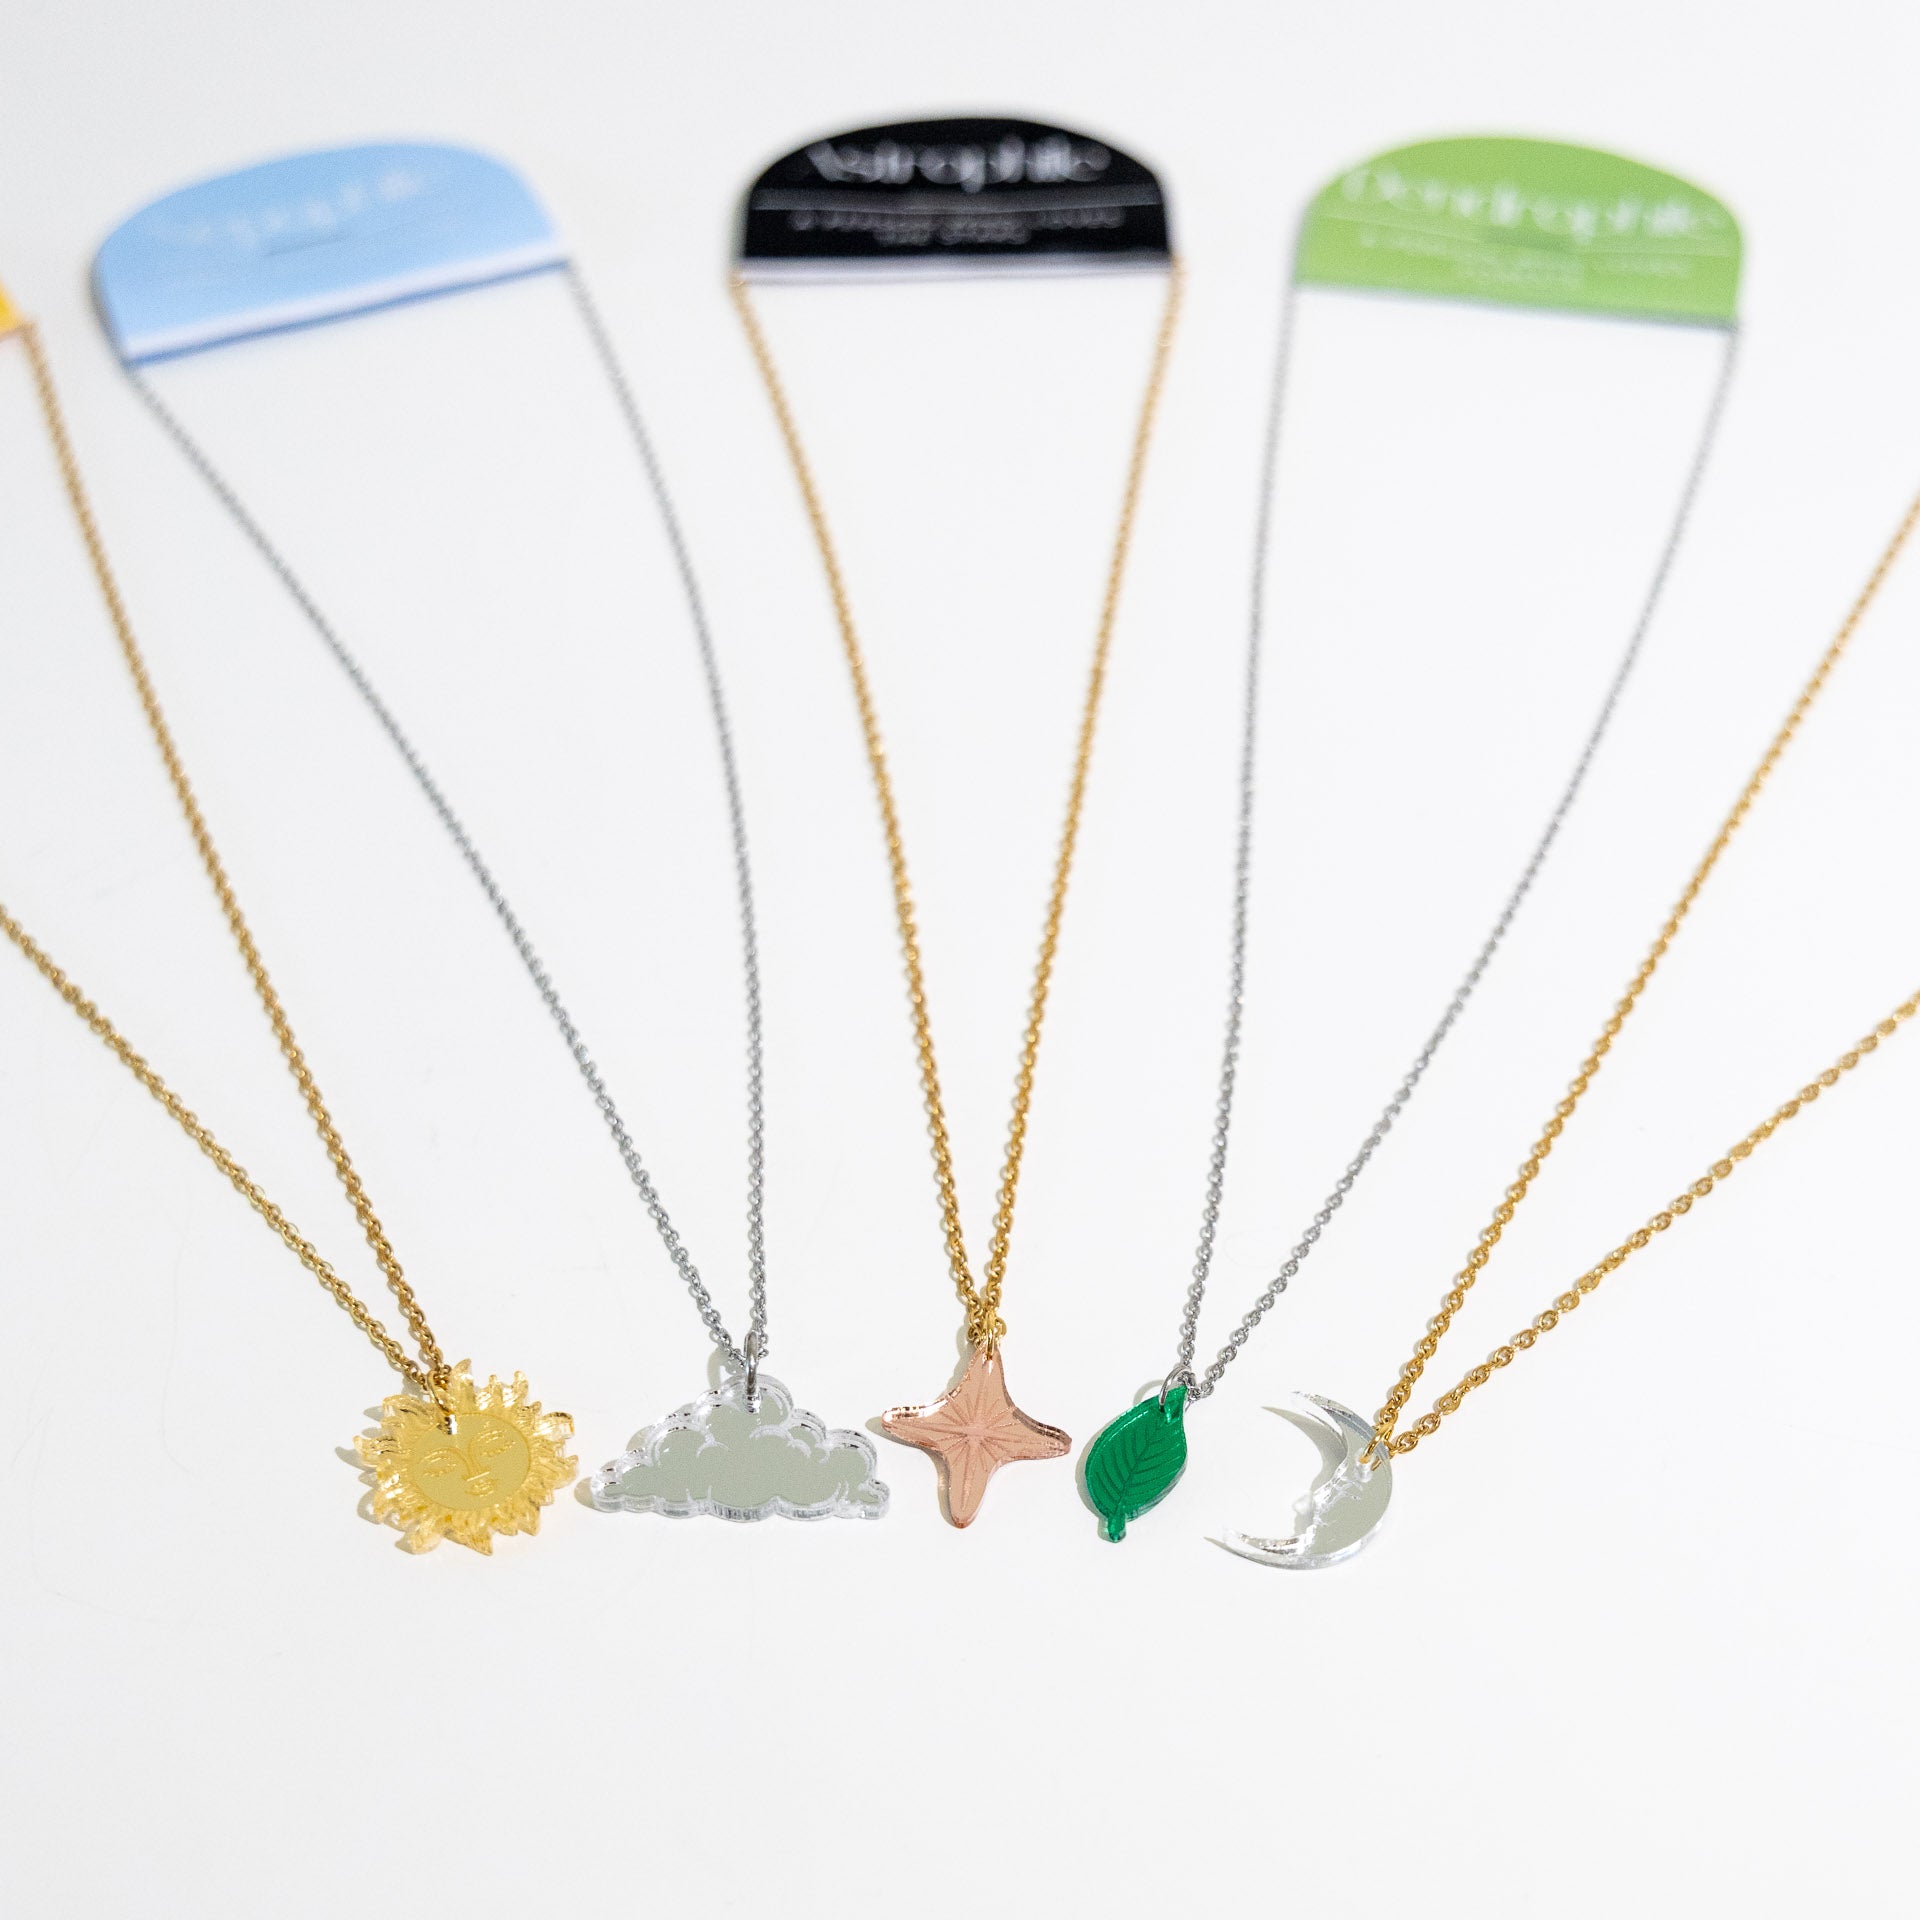 Urban Words Nature Lovers' Acrylic Necklaces (assorted)